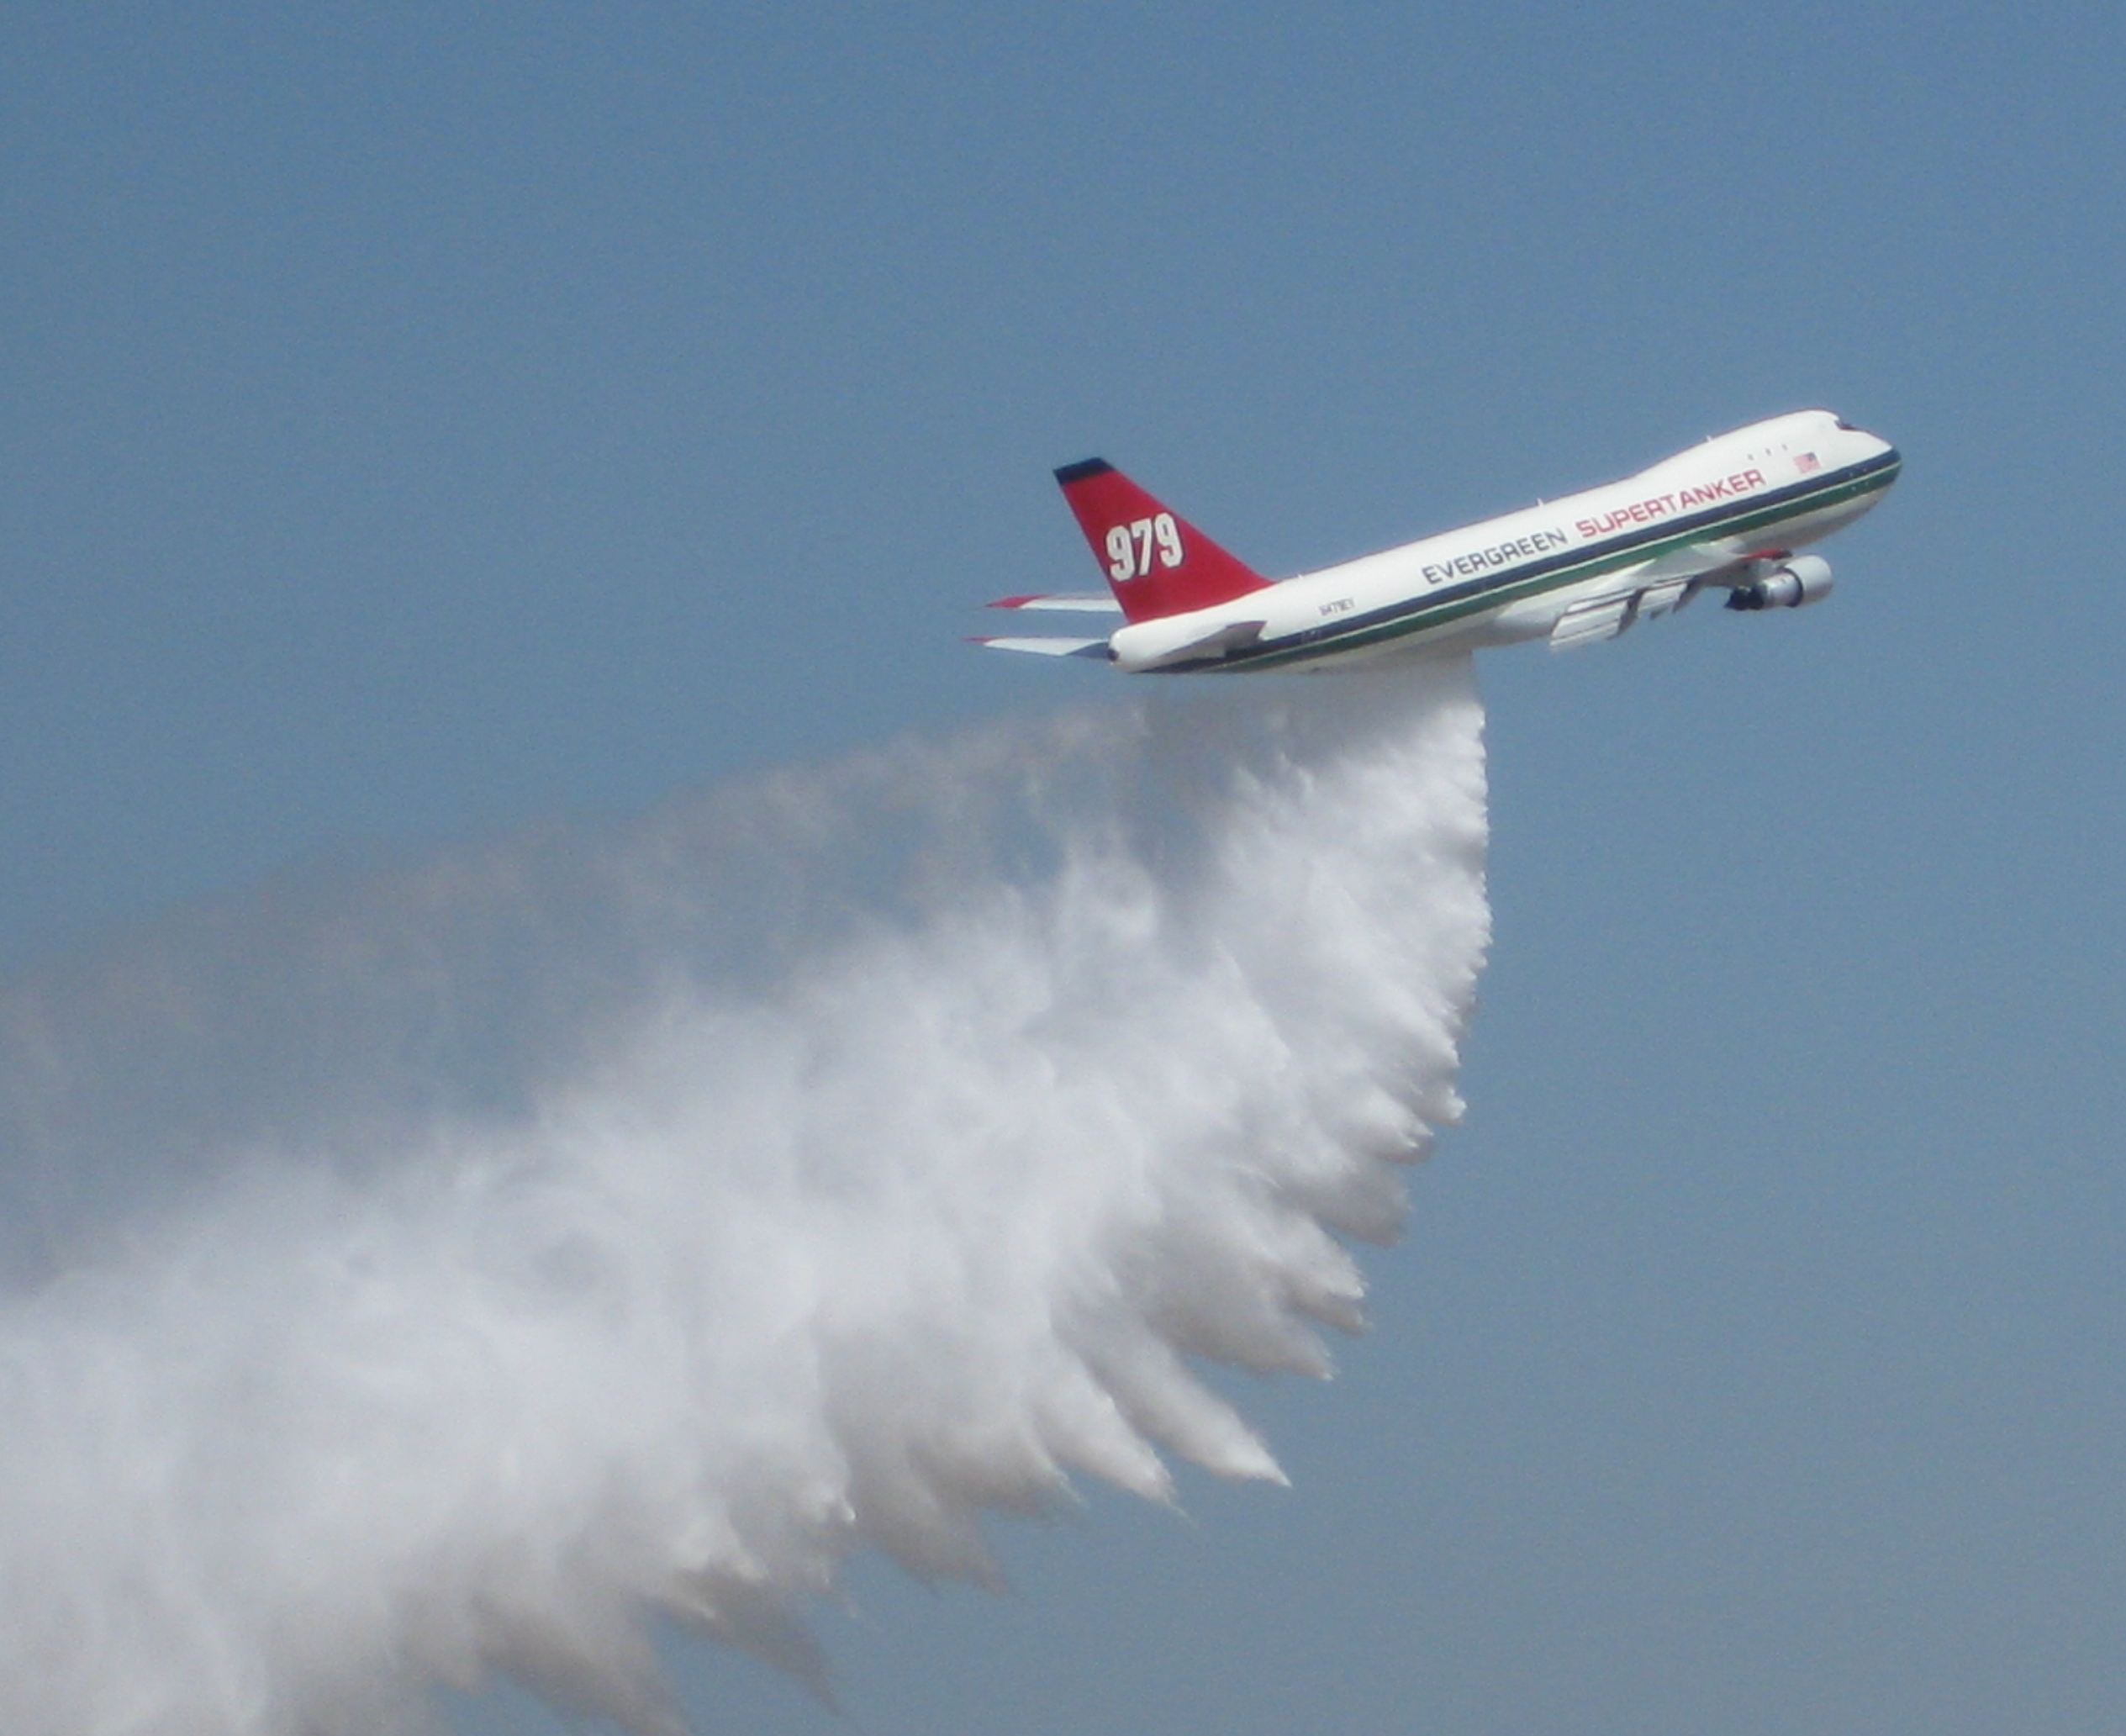 Firefighting 747 Supertanker Dumps 20,500 Gallons of Water from 500 Feet Up